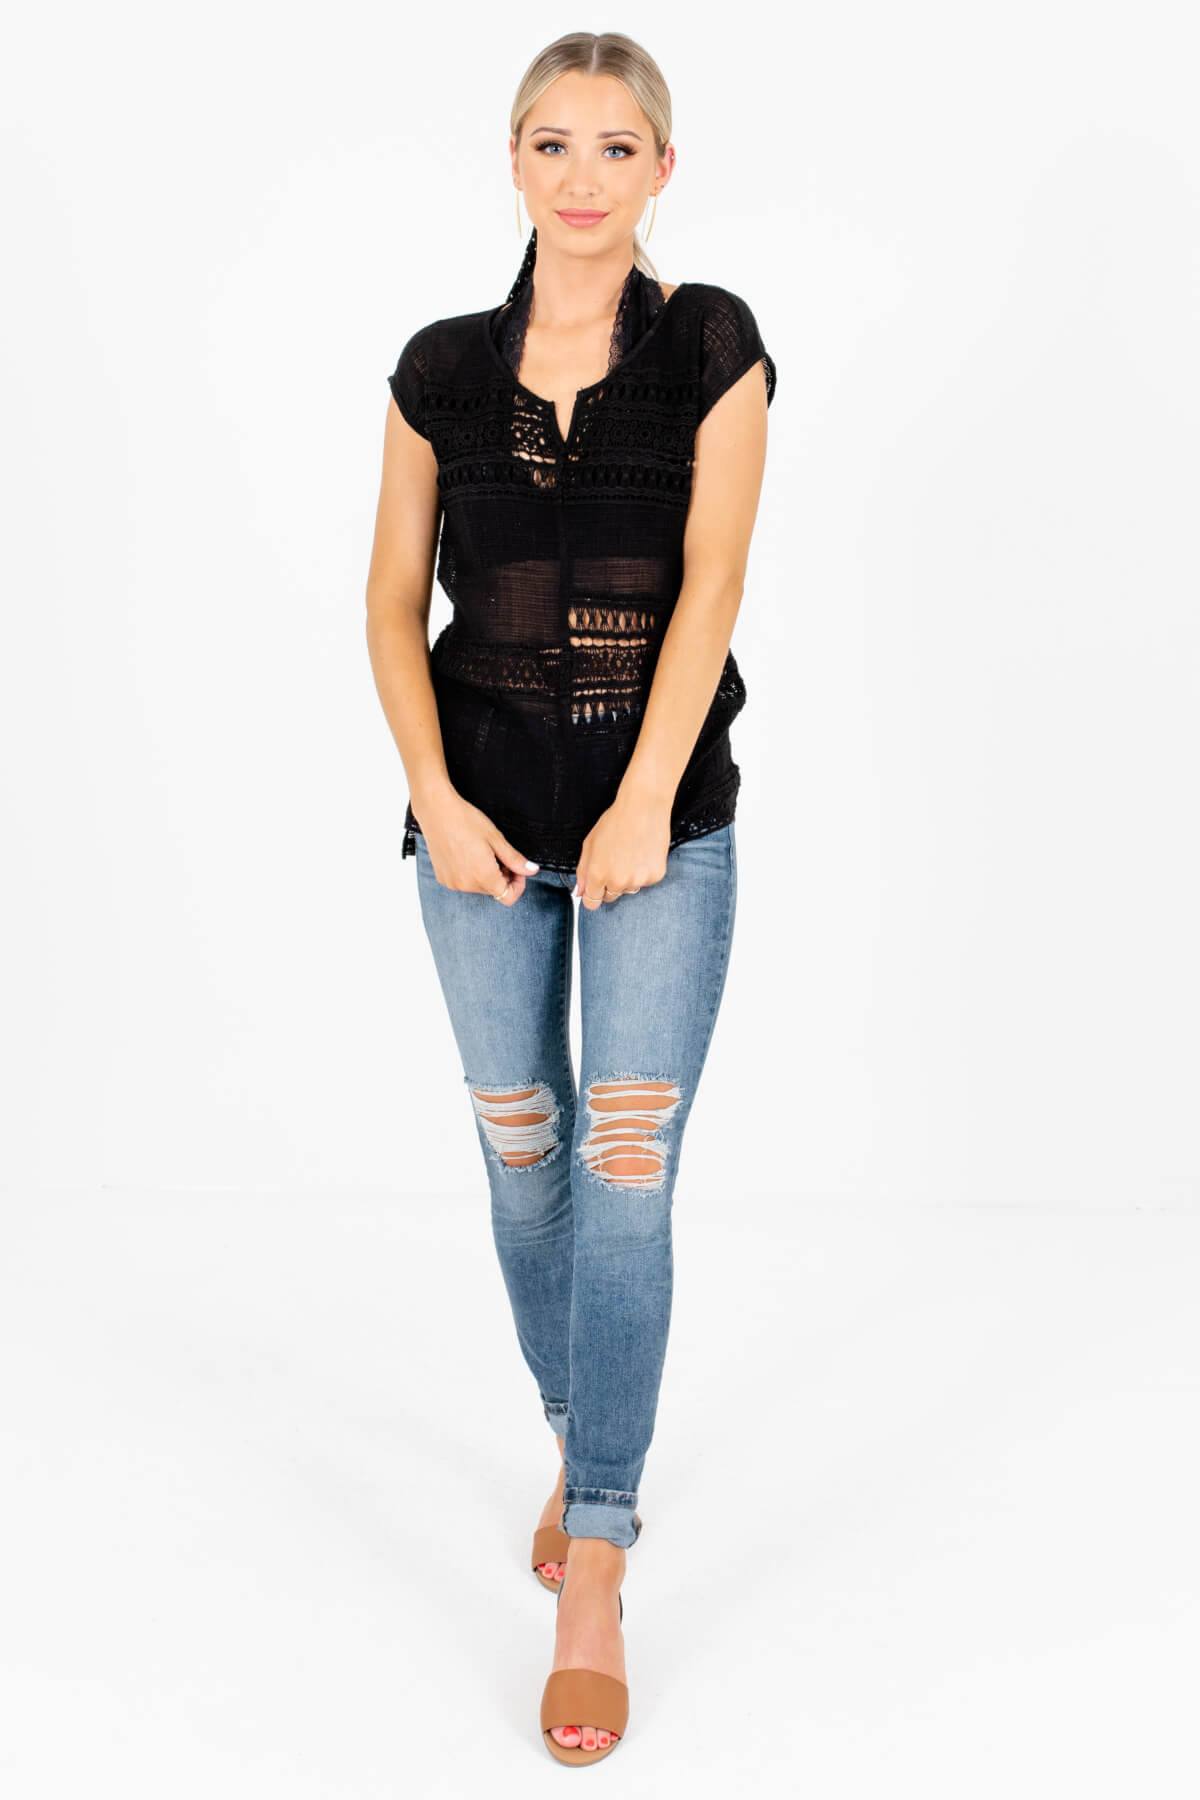 Women's Black Spring and Summertime Boutique Clothing